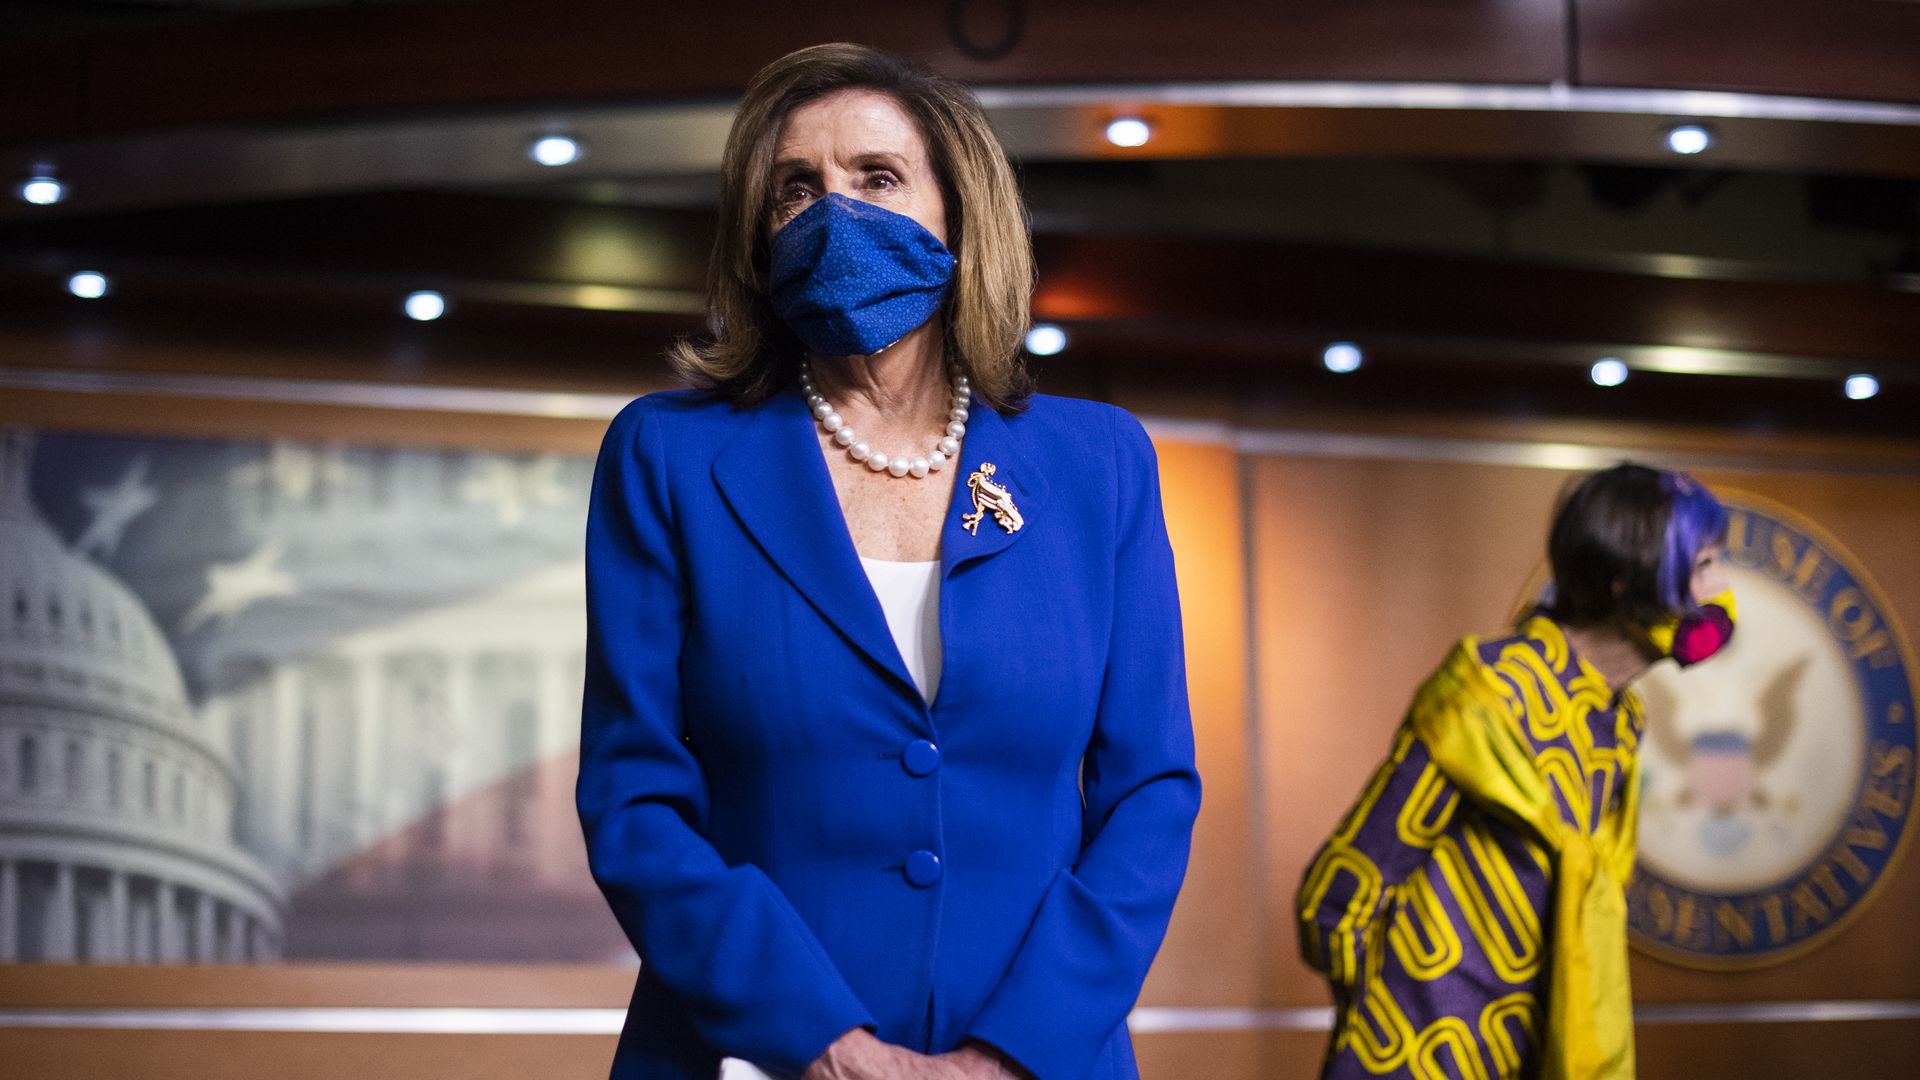 Speaker of the Houes Nancy Pelosi in a press room wearing a matching blue mask and suit